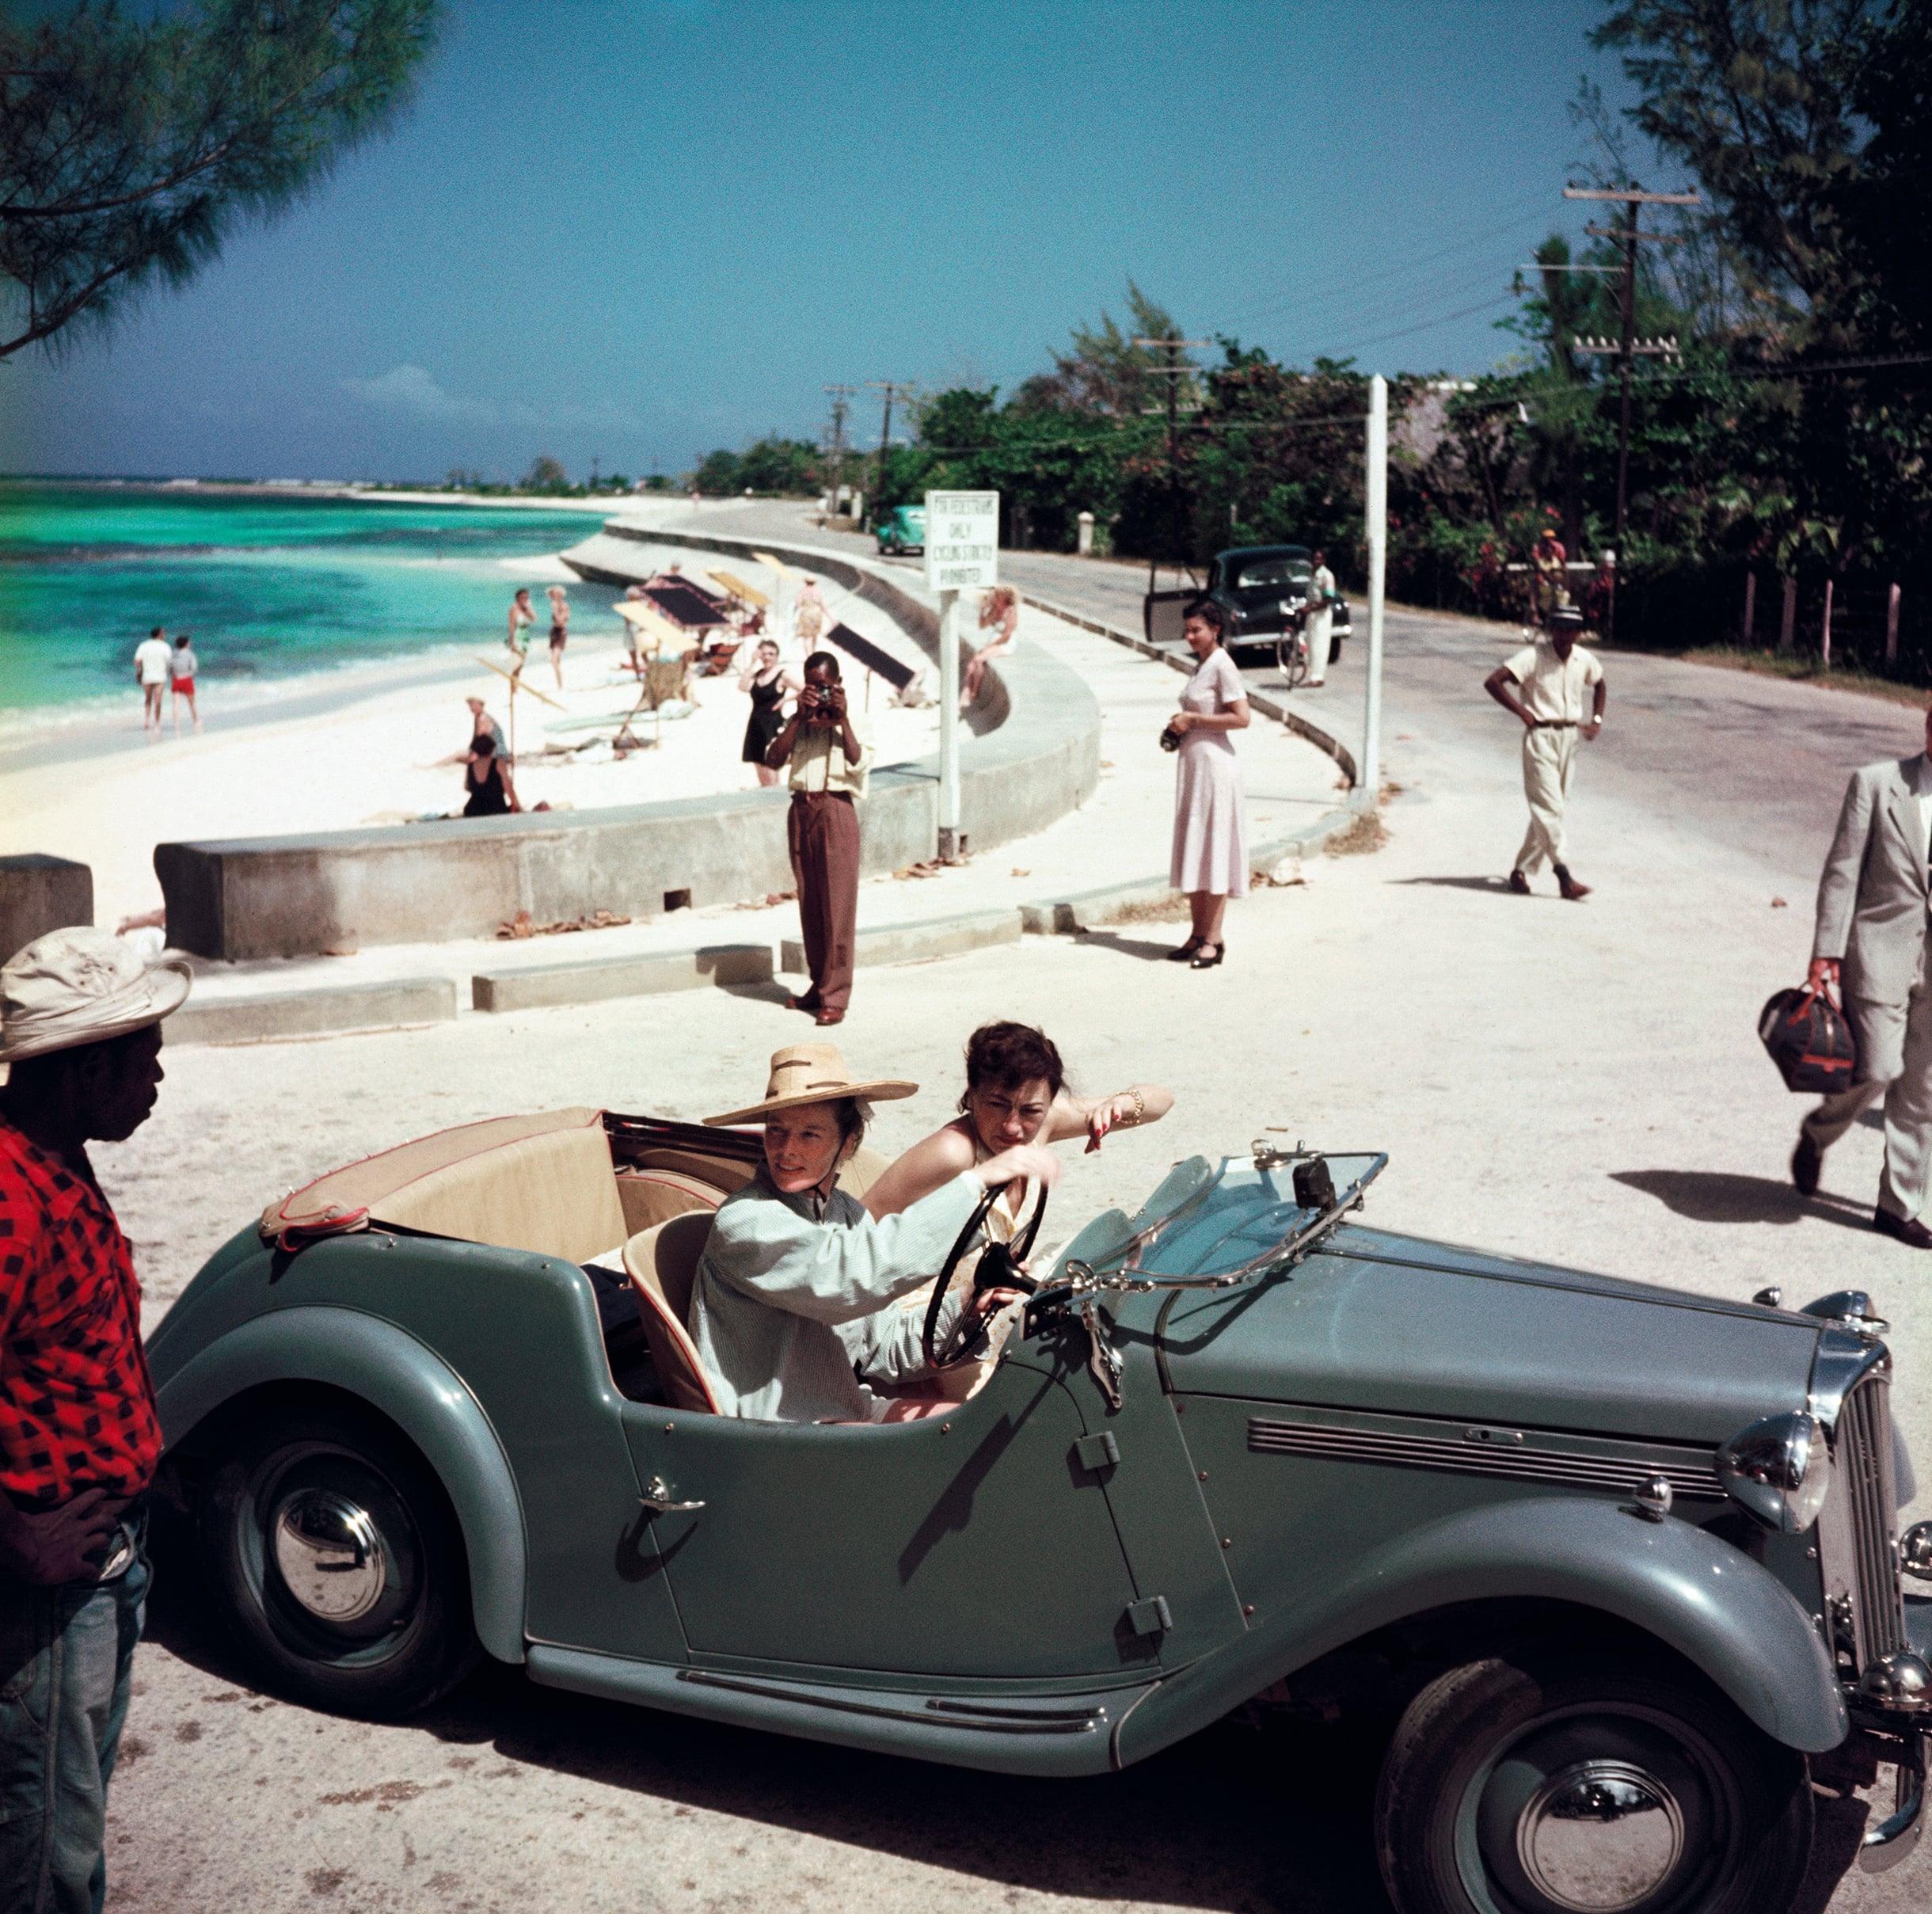 Katharine Hepburn 

1953 

1953: American film star Katharine Hepburn (1907 – 2003) driving along the waterfront with Irene Mayer Selznick at Montego Bay, Jamaica. 

(Photo by Slim Aarons)

60x60” / 152 x 152 cm - paper size 
Archival pigment